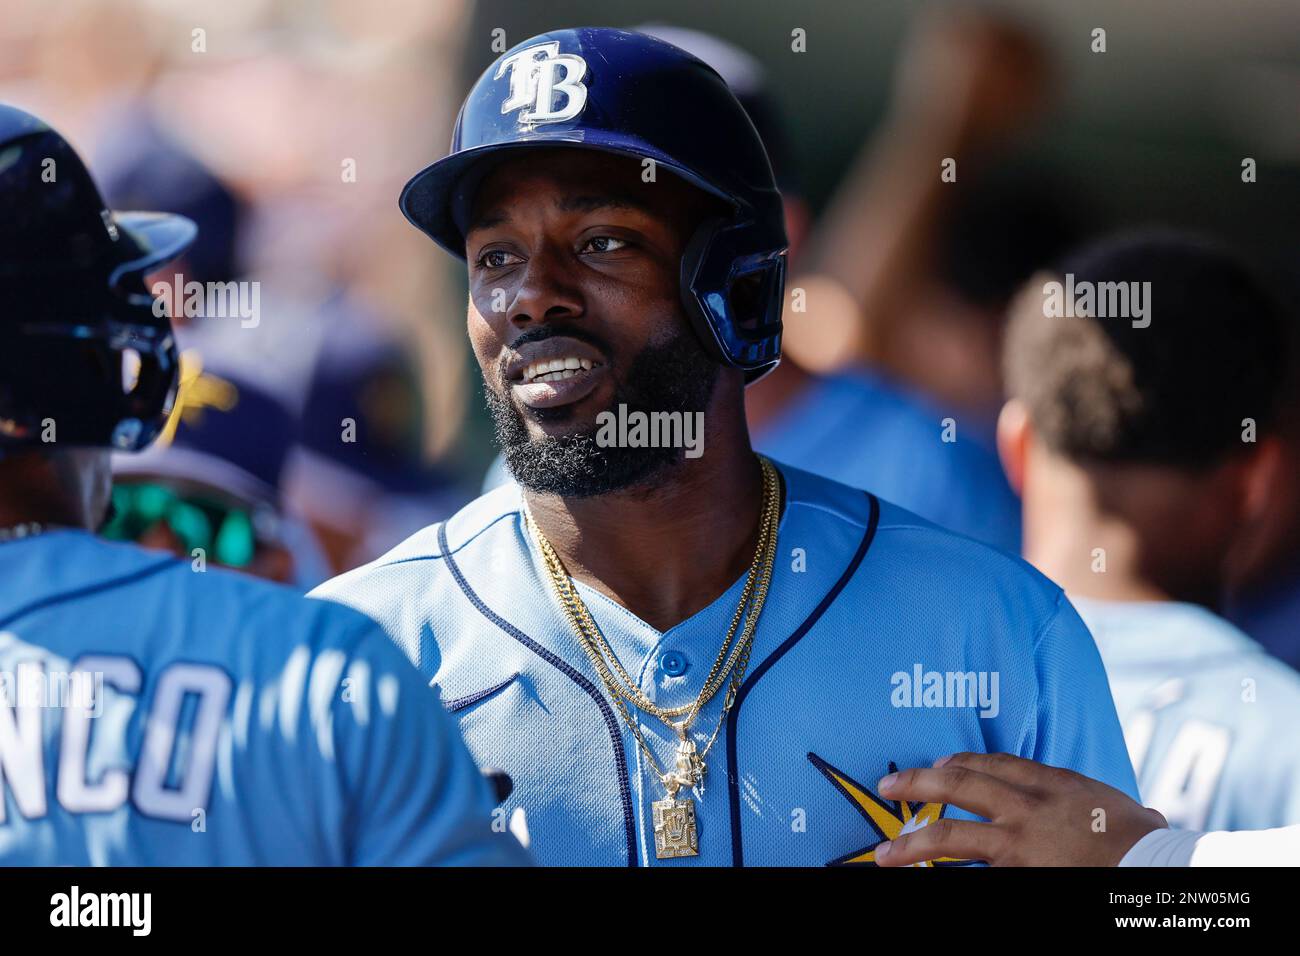 Sarasota FL USA; Tampa Bay Rays left fielder Randy Arozarena (56) celebrates in the dugout after hitting a home run during an MLB spring training game against the Baltimore Orioles at Ed